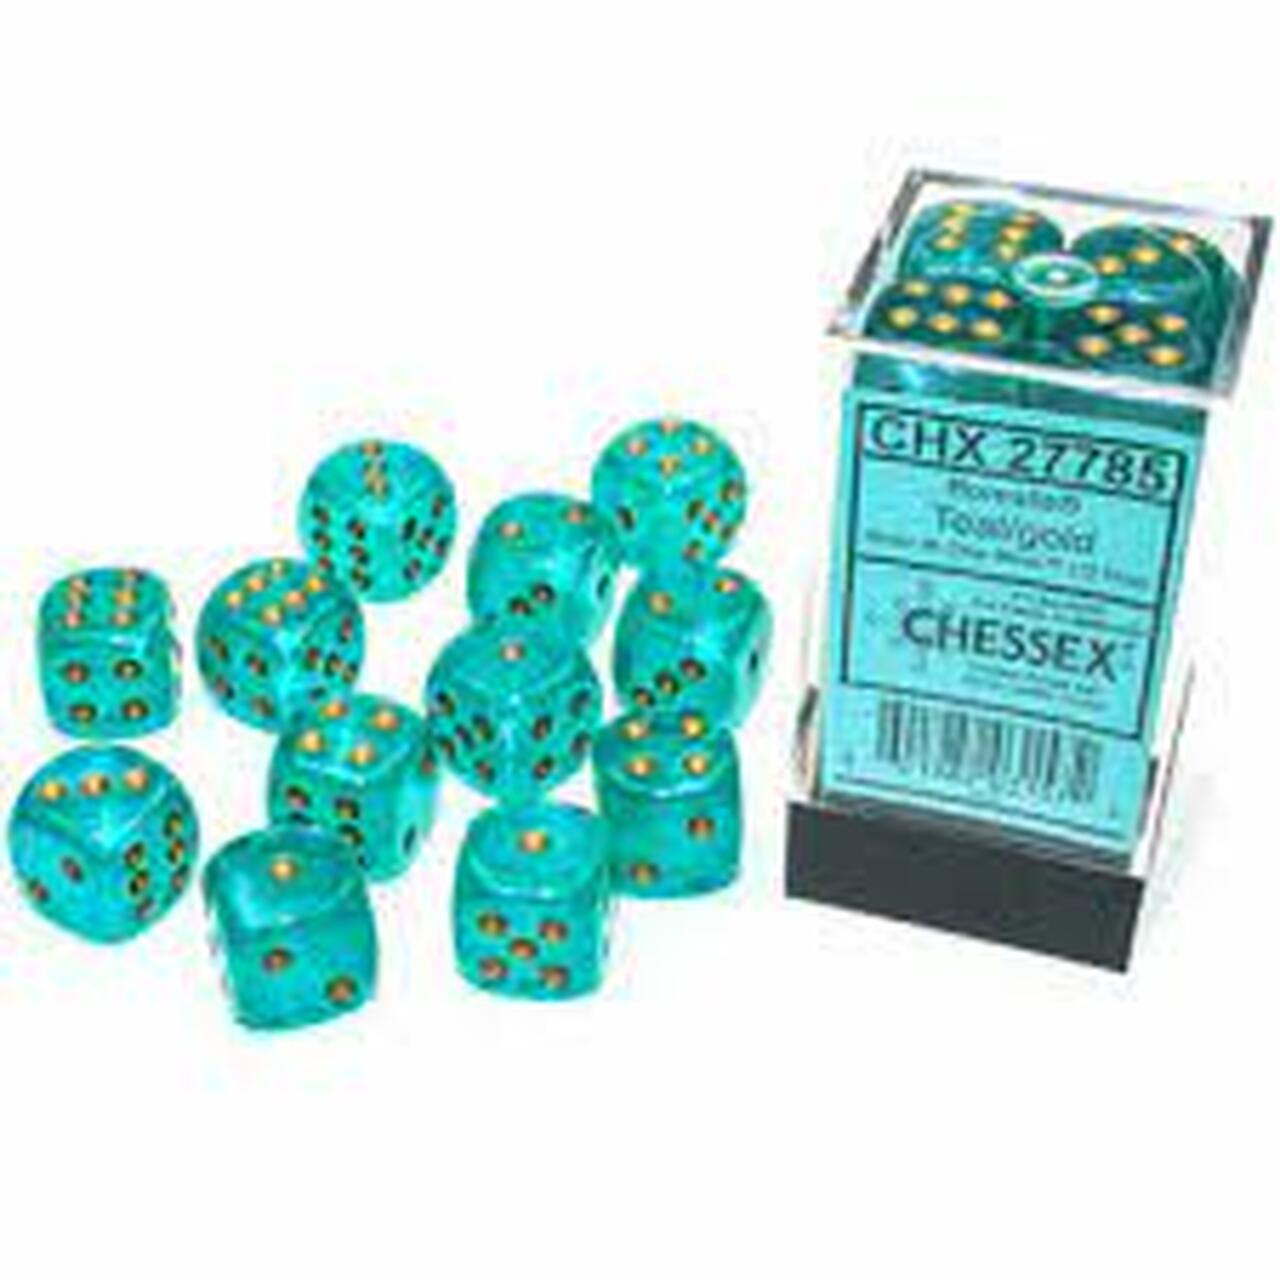 Chessex Teal/Gold D6 Dice